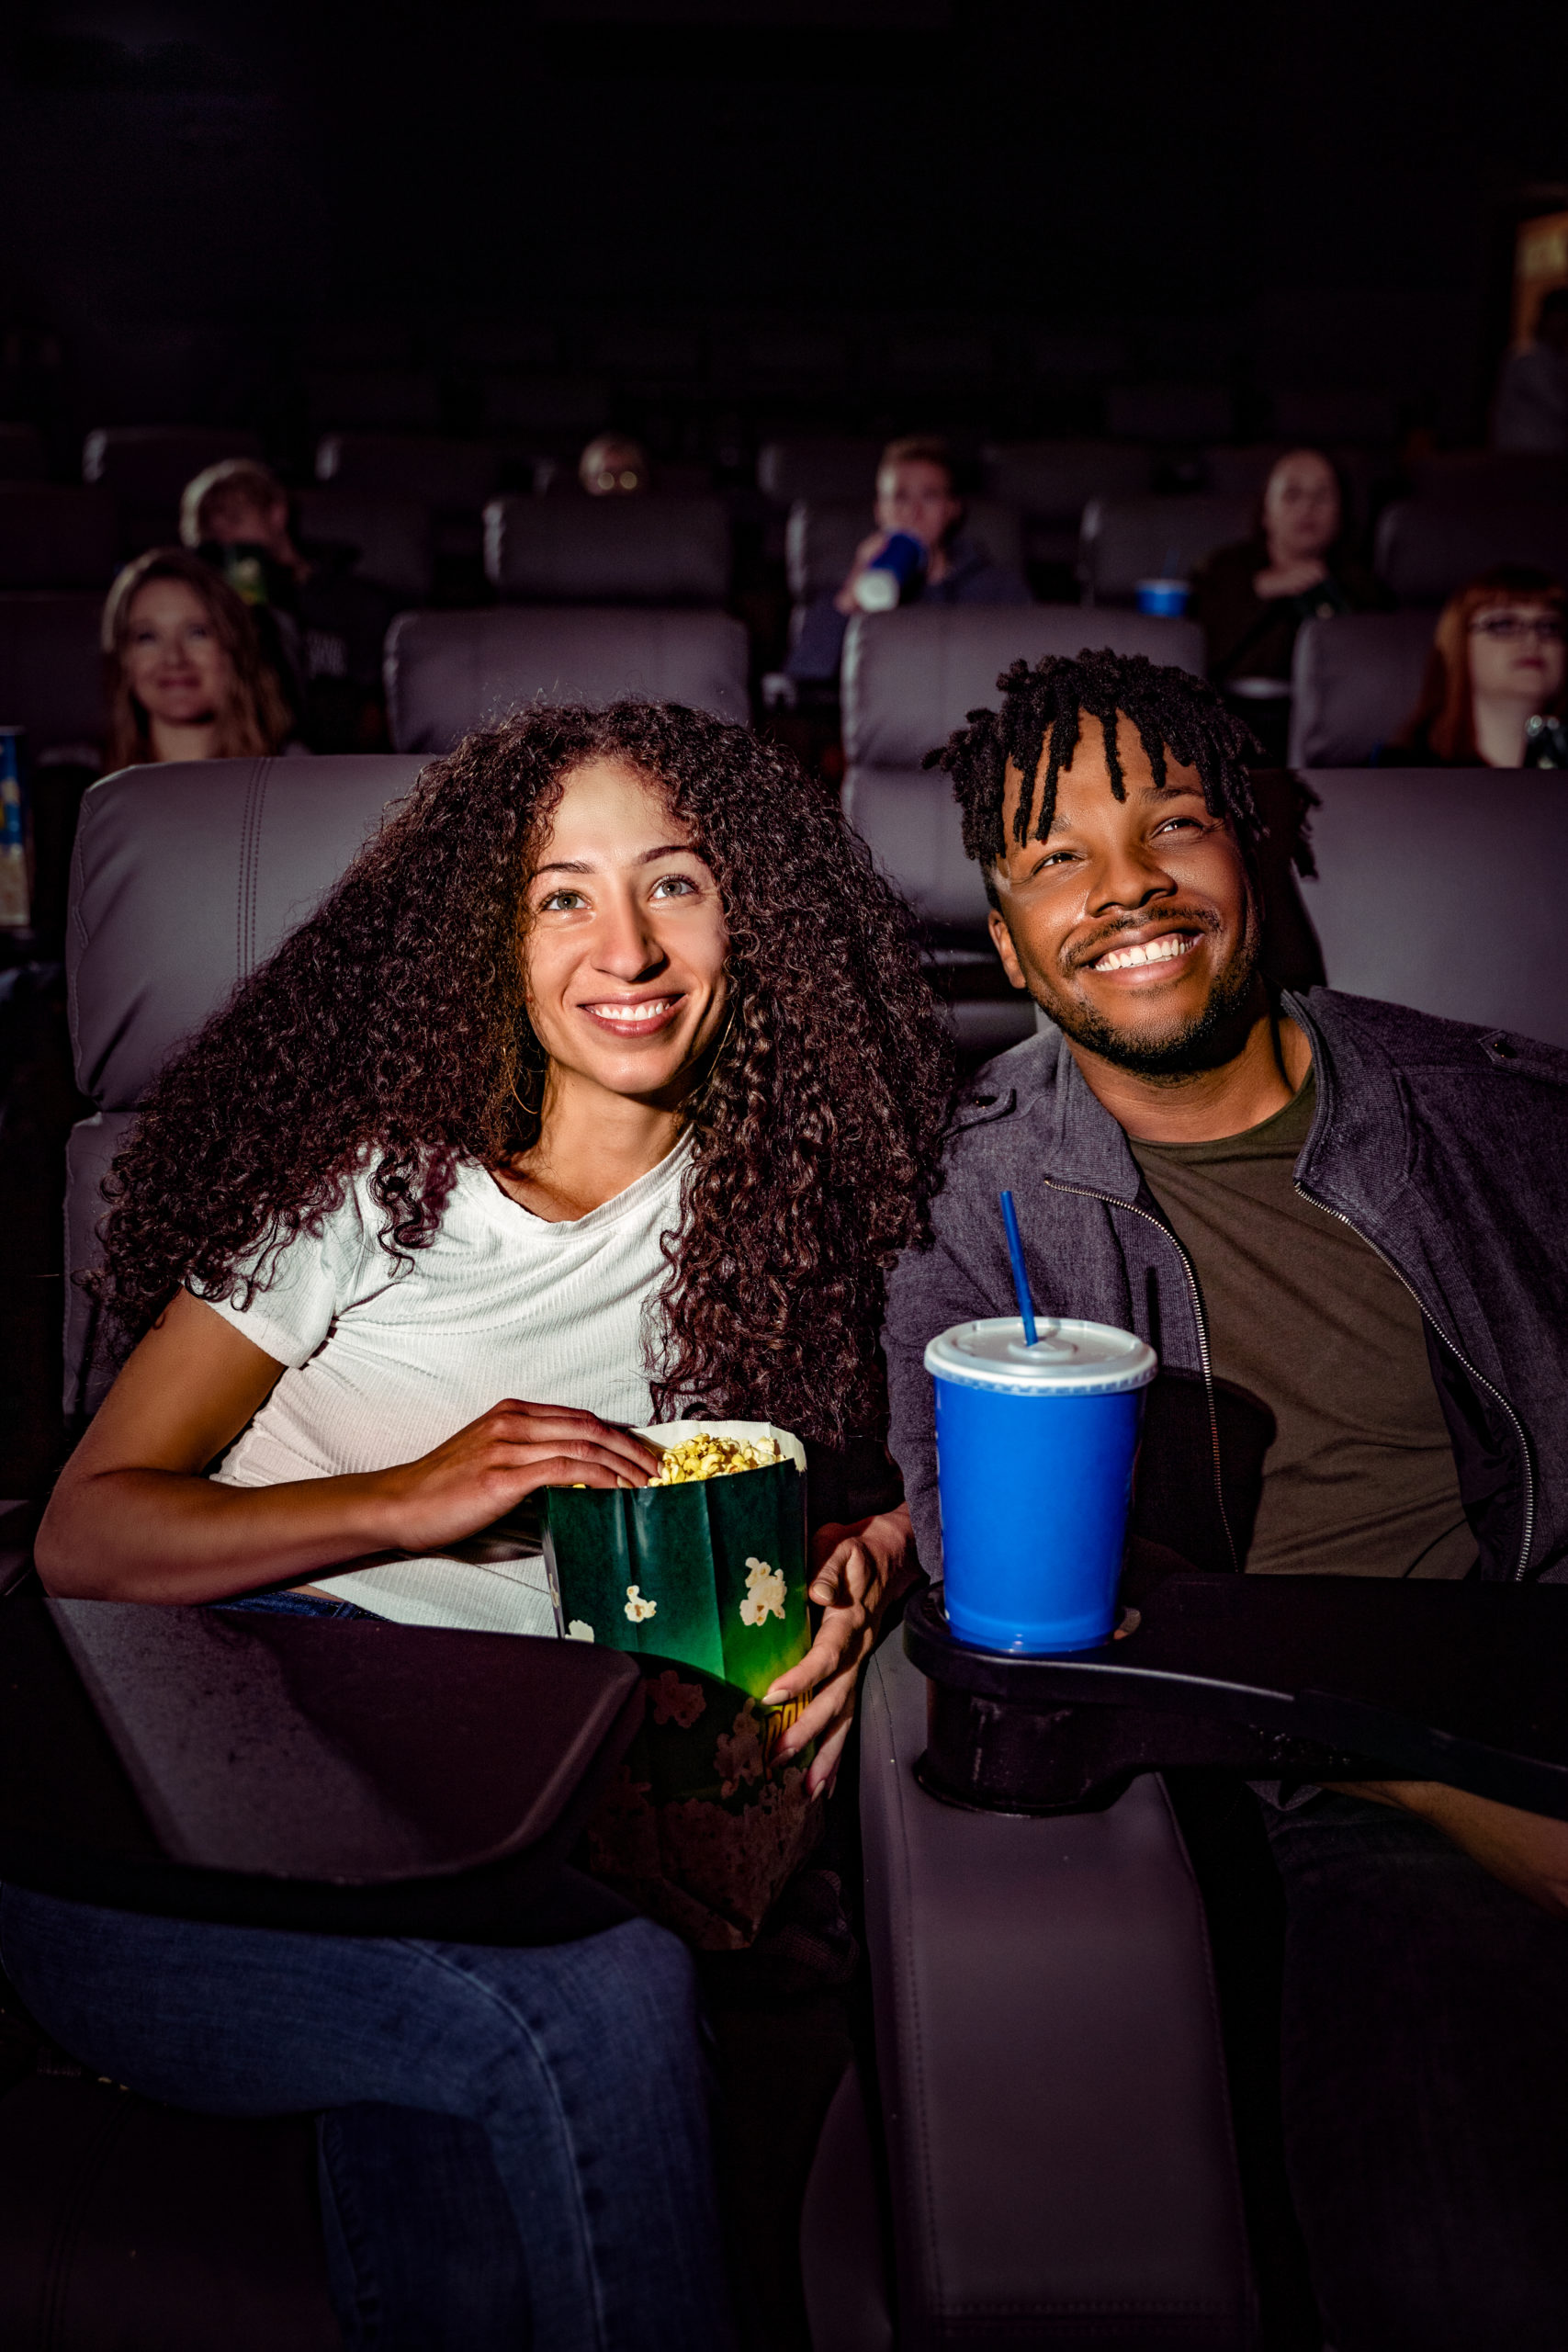 A couple at the movies smiling and eating popcorn